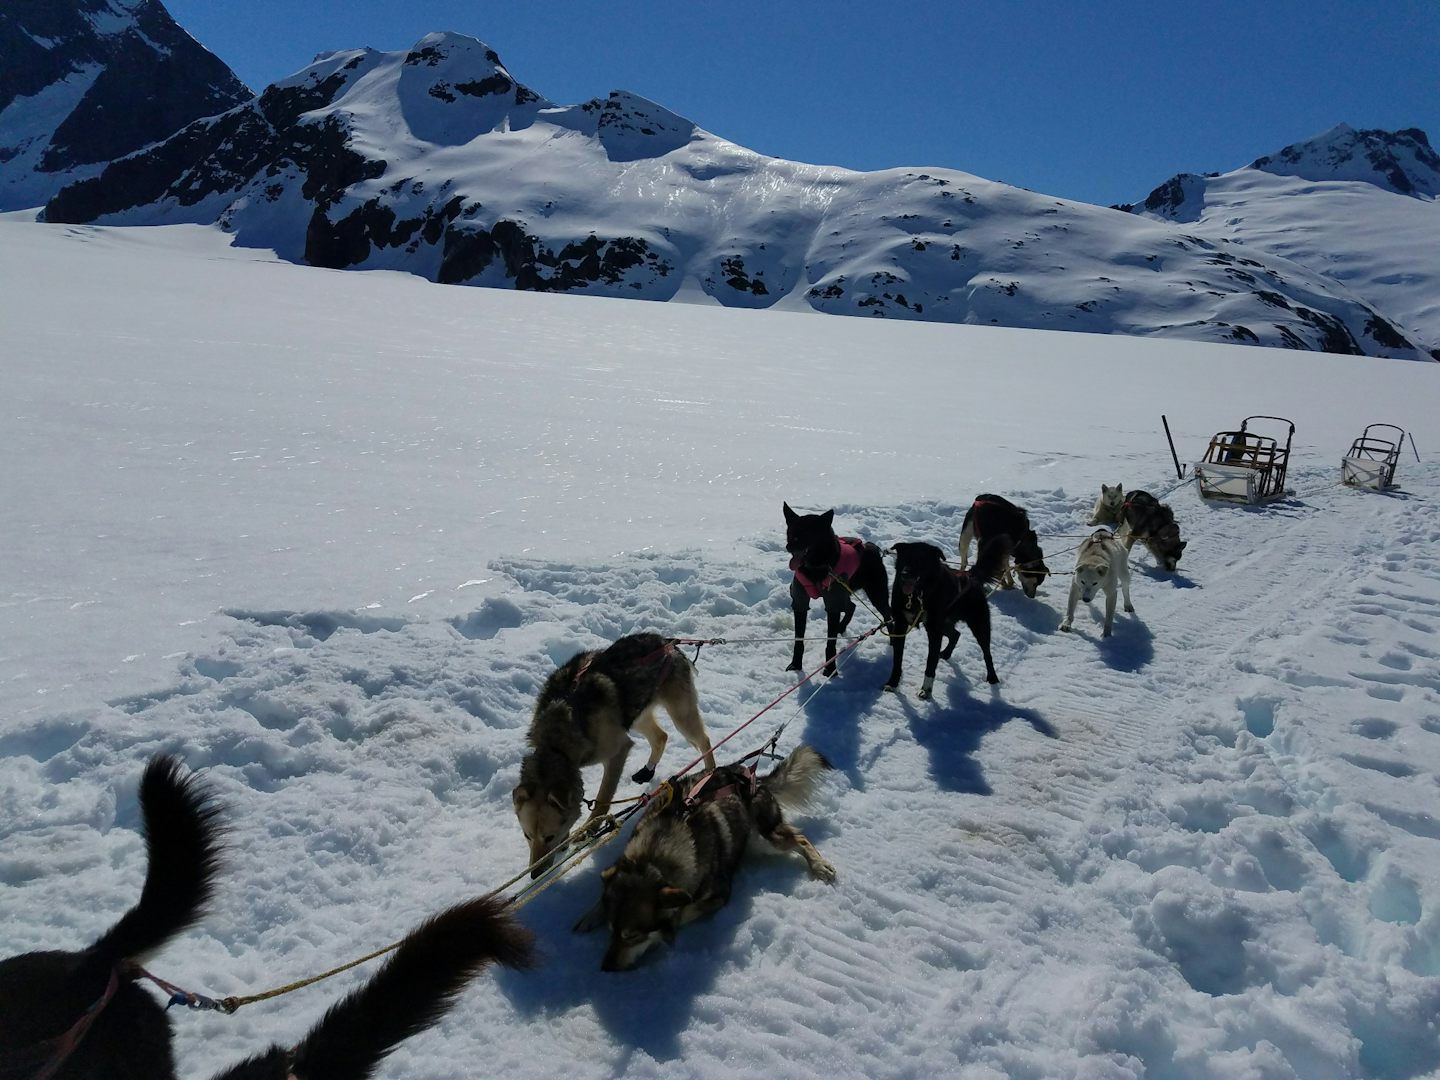 Dog sledding on a glacier was the BEST!  Would highly recommend this shore